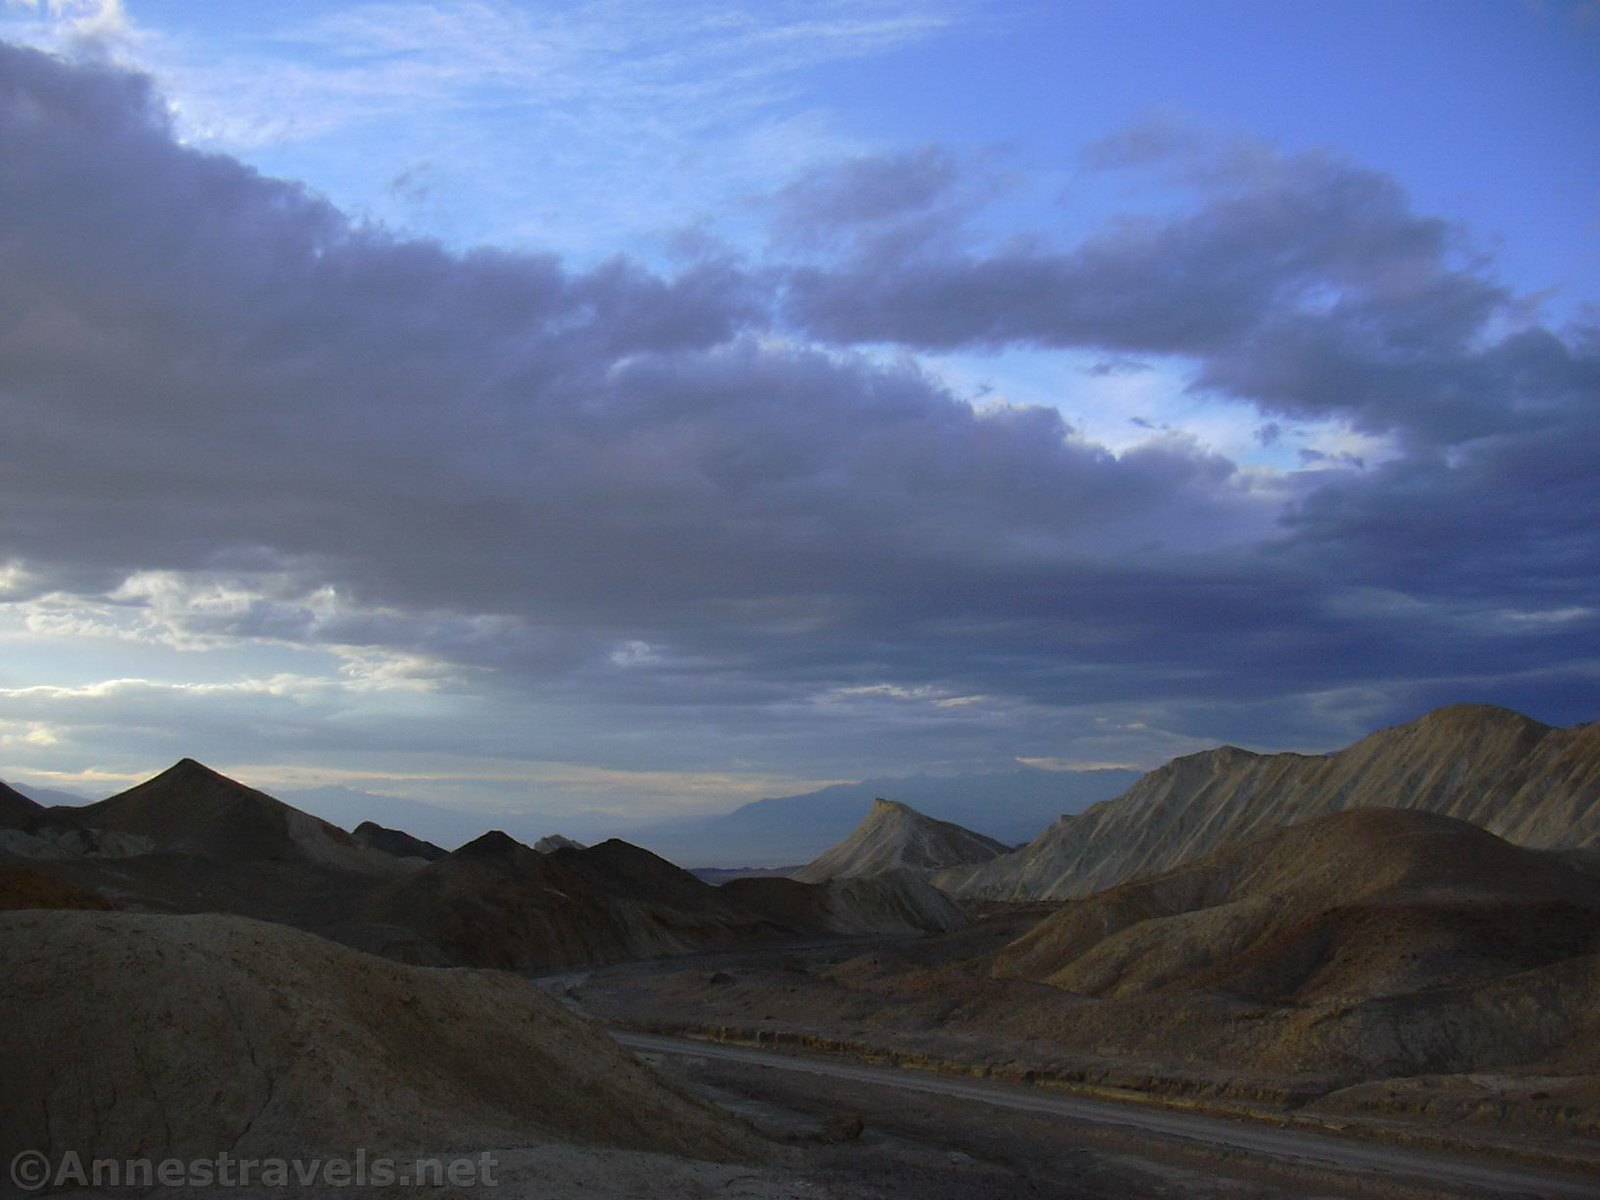 Evening on the 20 Mule Team Scenic Drive, Death Valley National Park, California